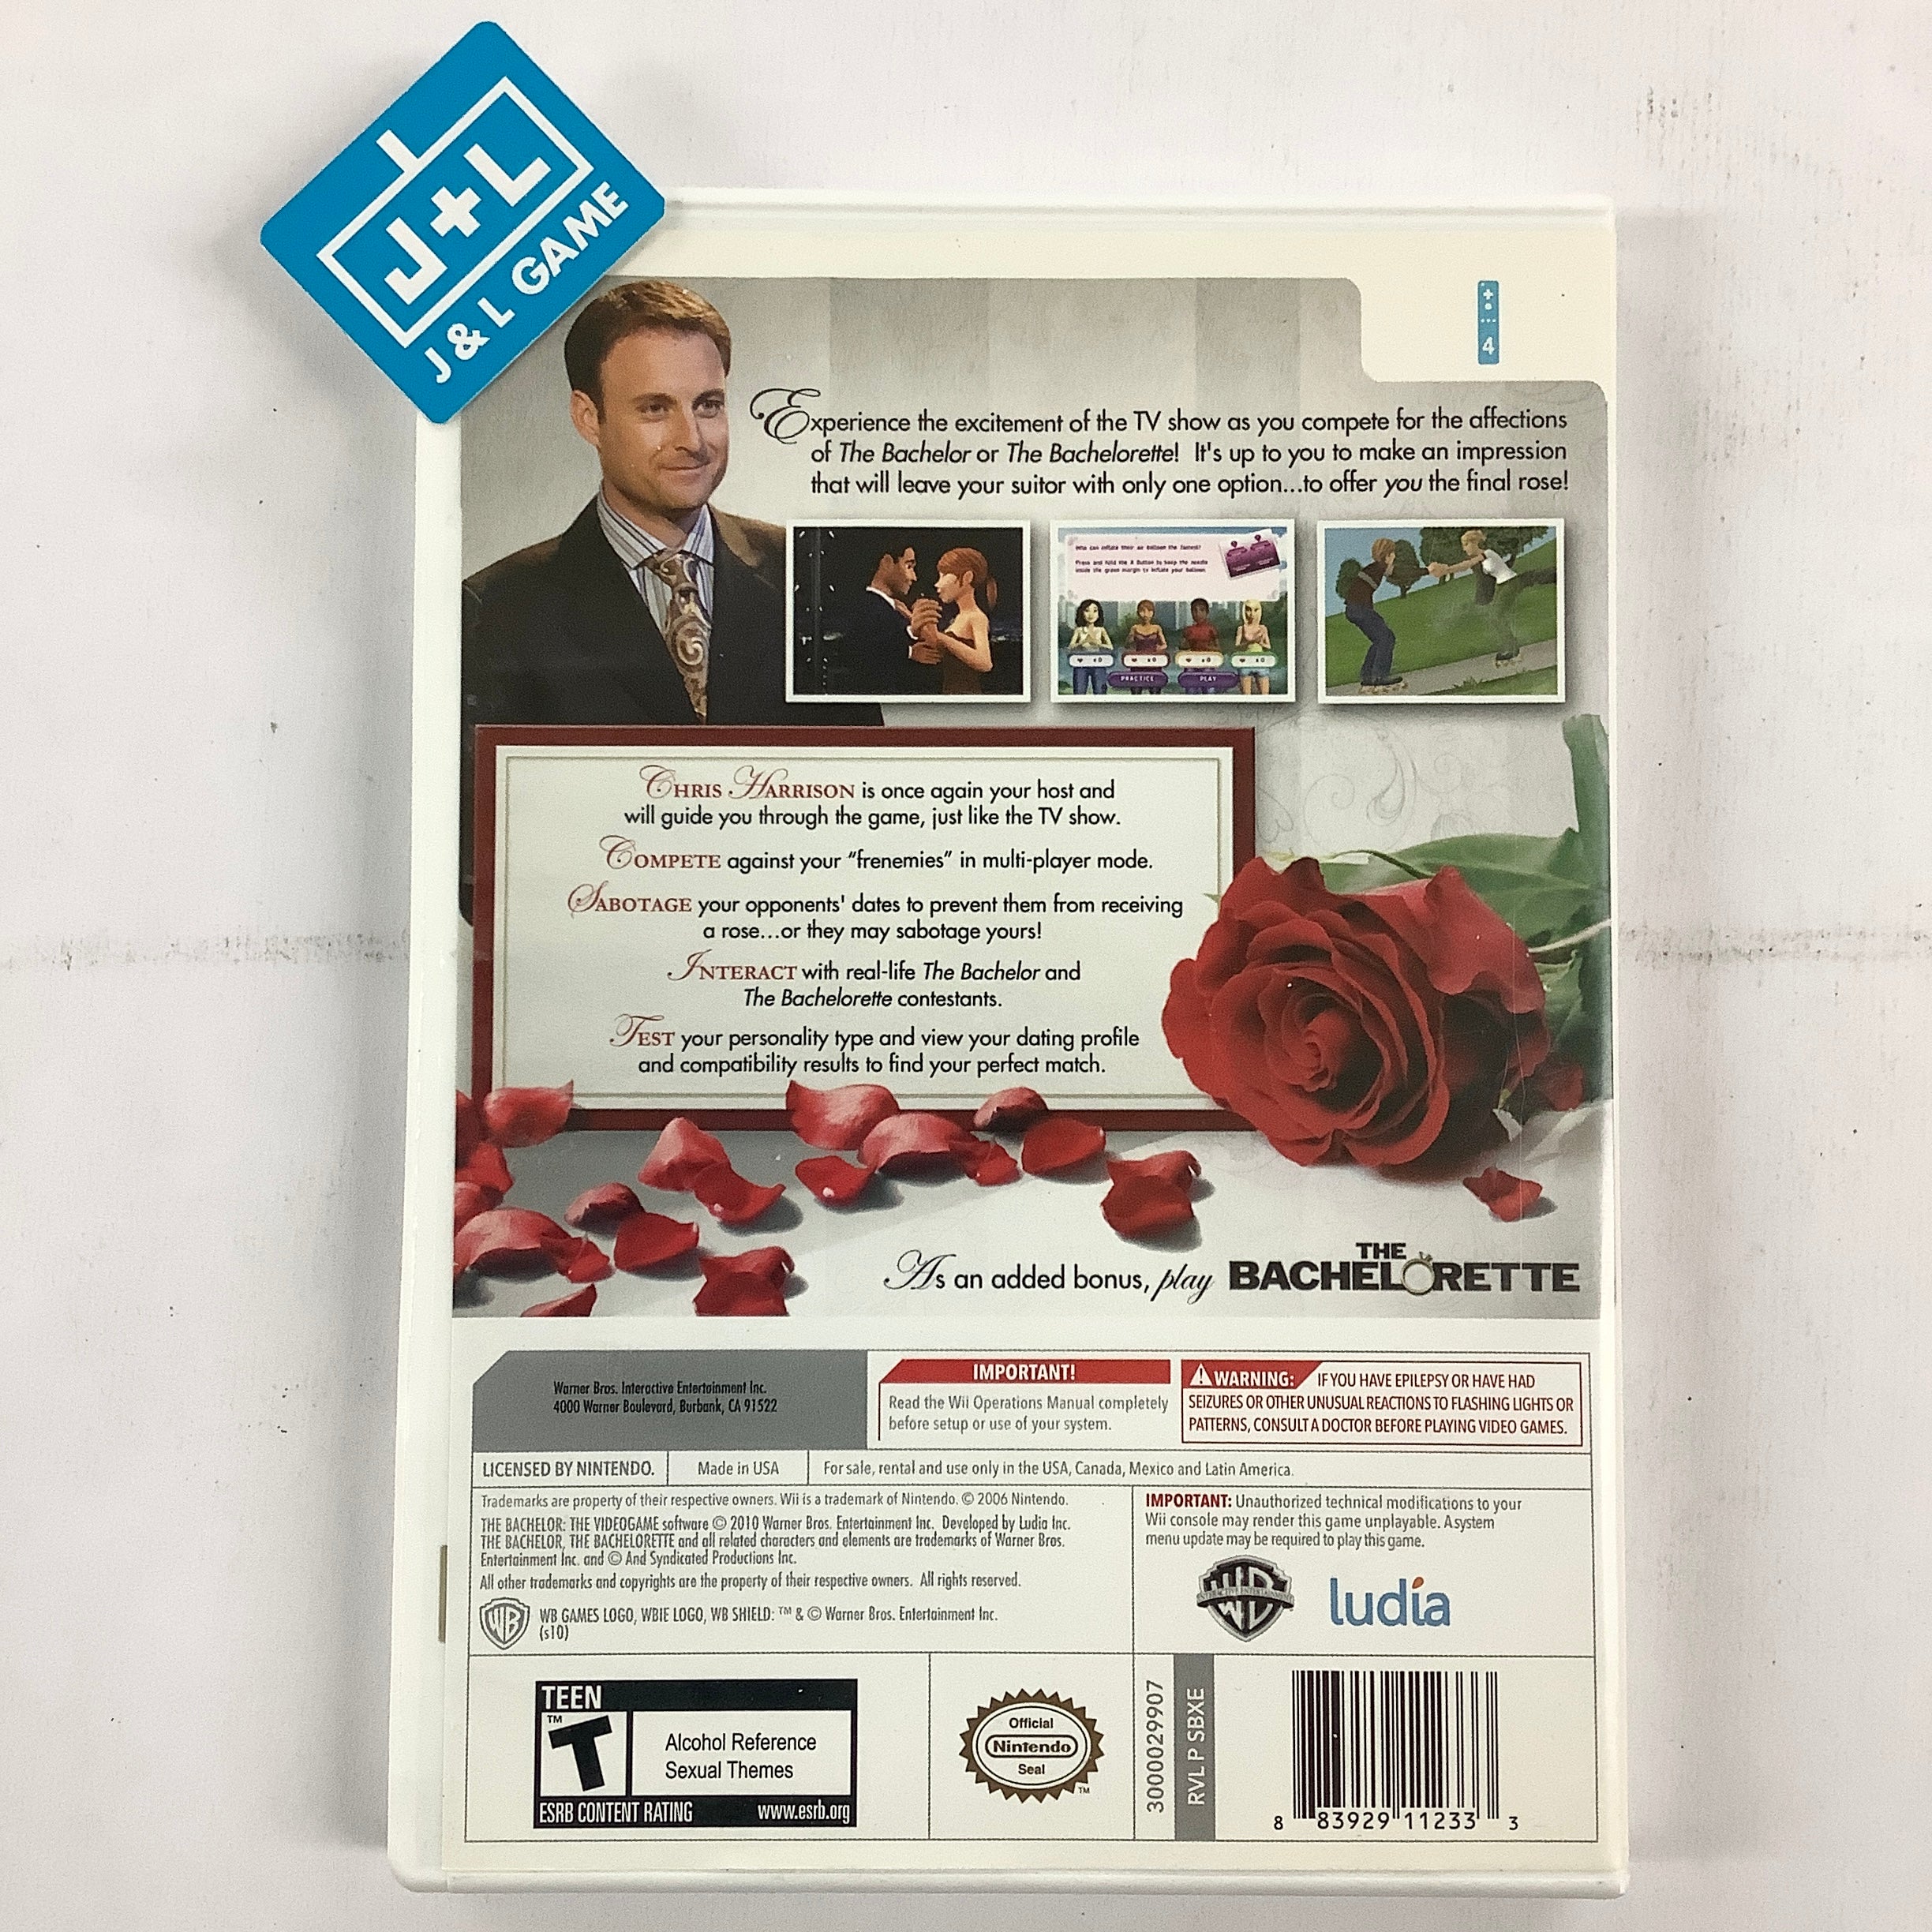 The Bachelor: The Videogame - Nintendo Wii [Pre-Owned] Video Games Warner Bros. Interactive Entertainment   